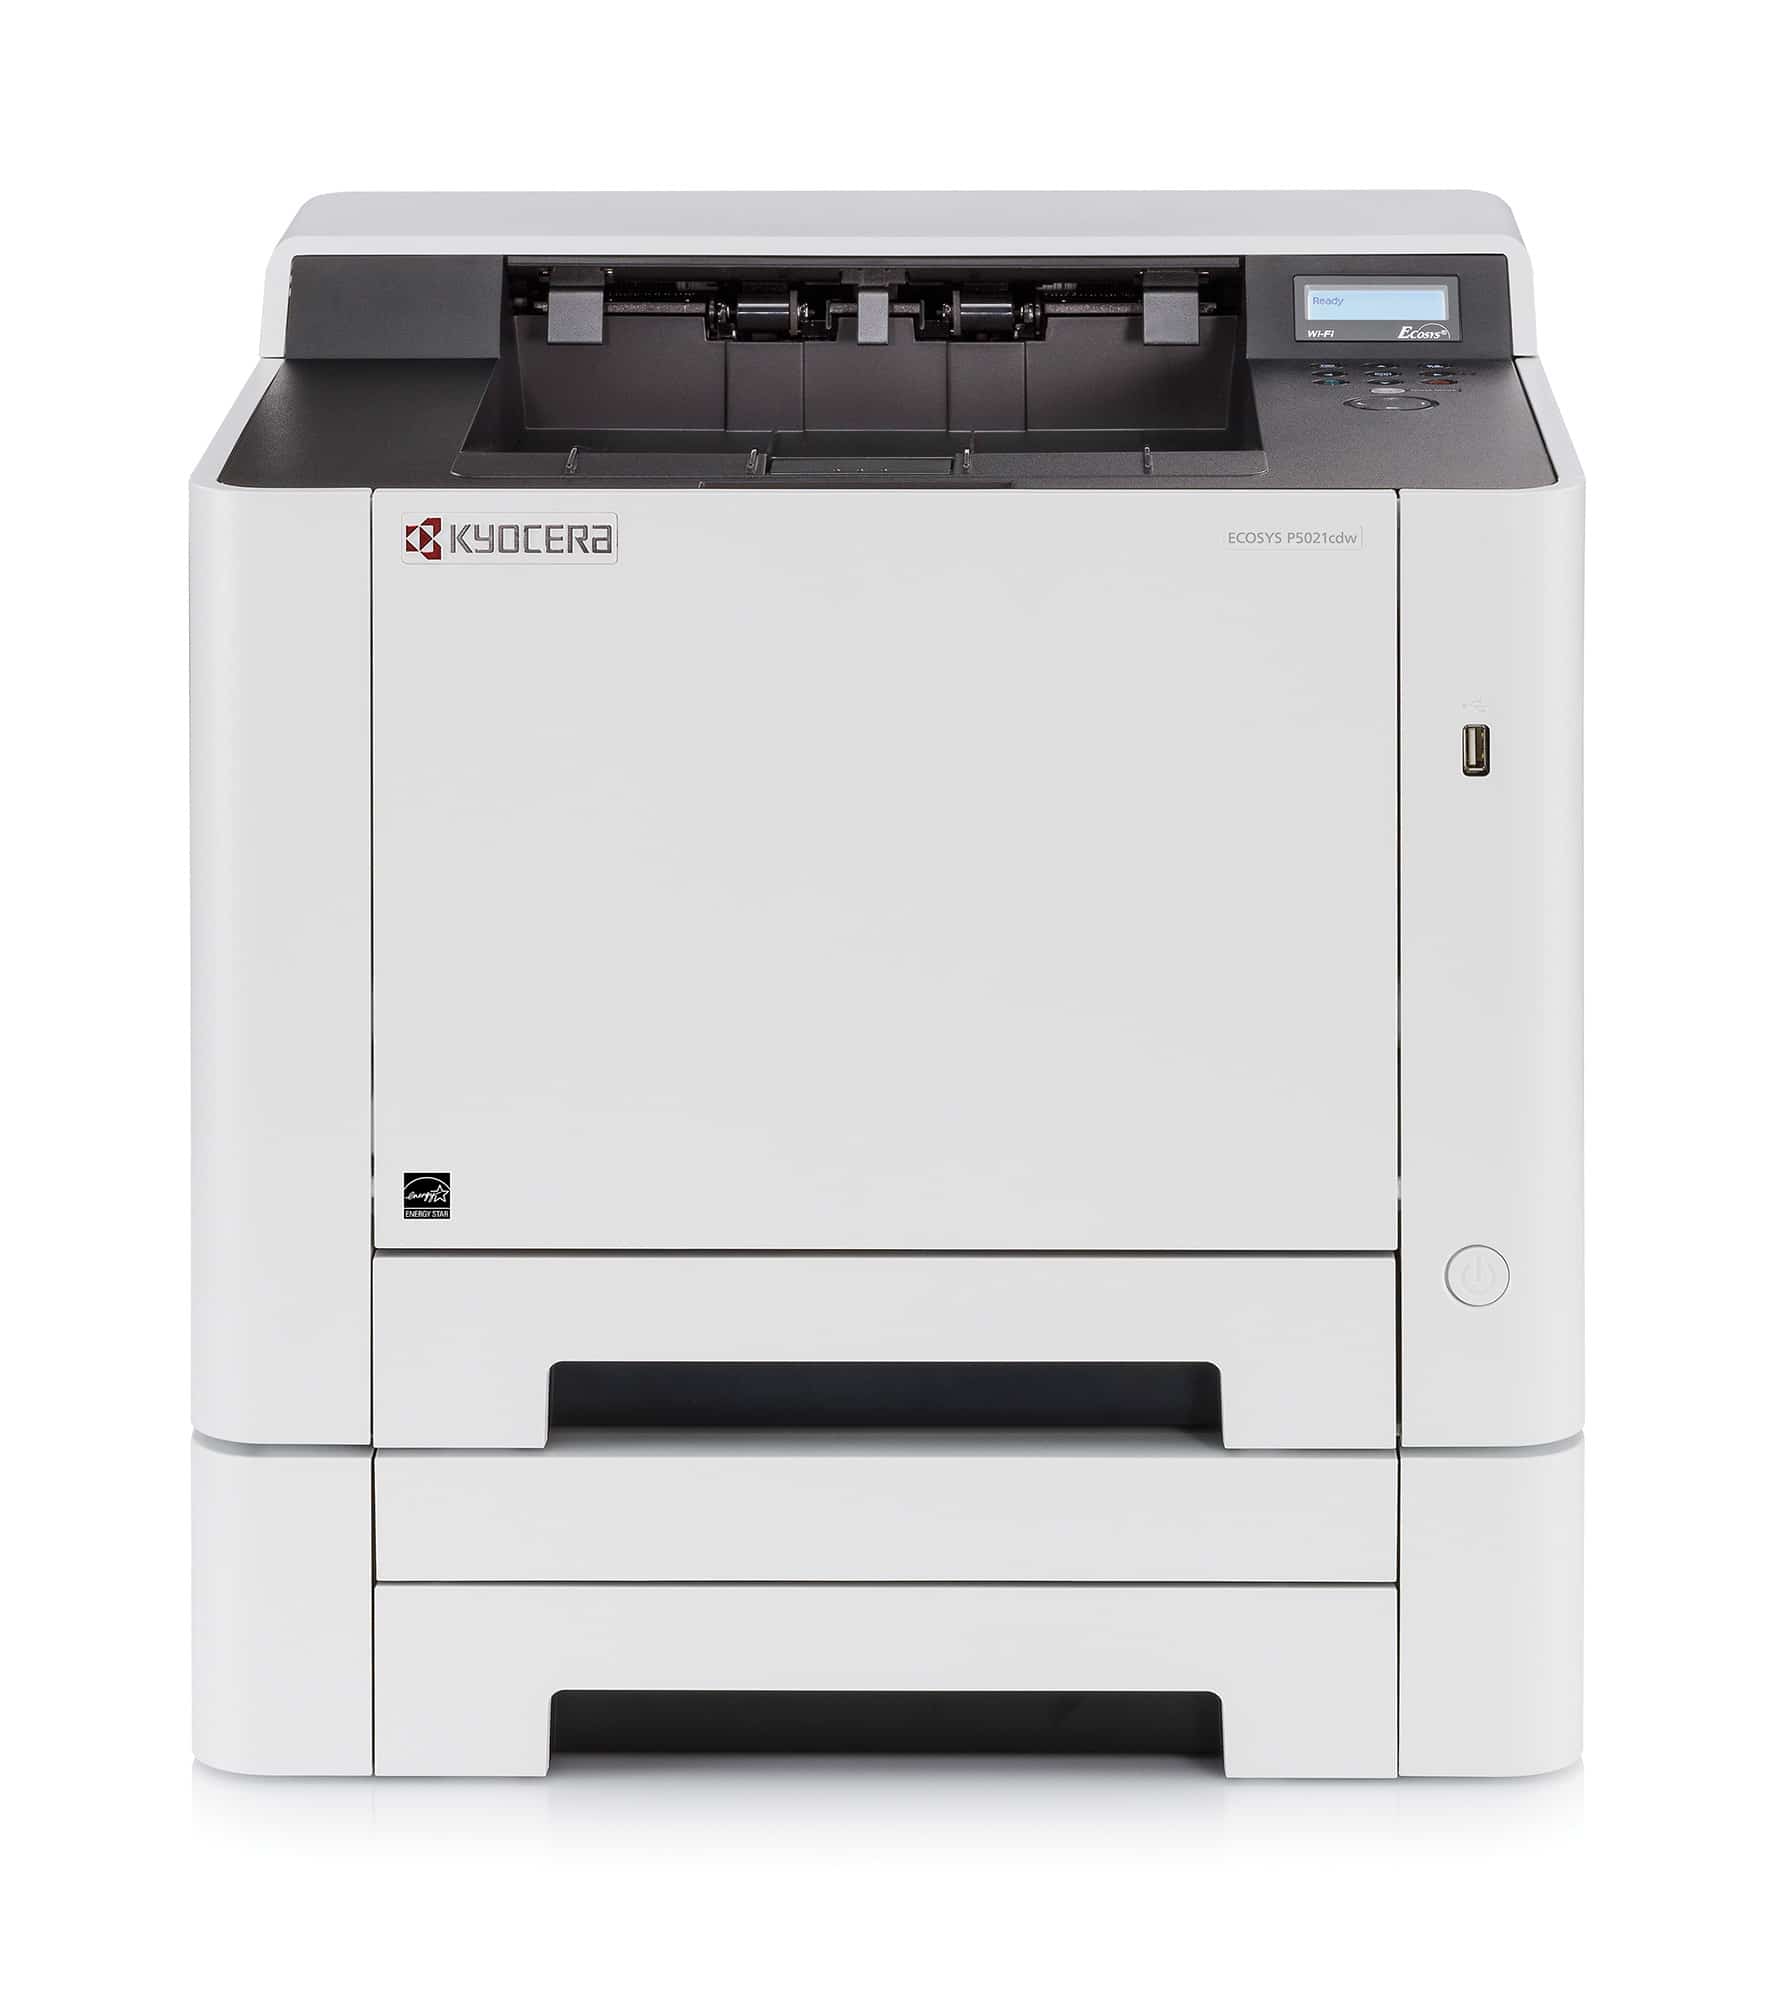 Kyocera ECOSYS P5021cdw ECOSYS P5021cdw ECOSYS P5021cdw Printer For Sale & Lease in Houston